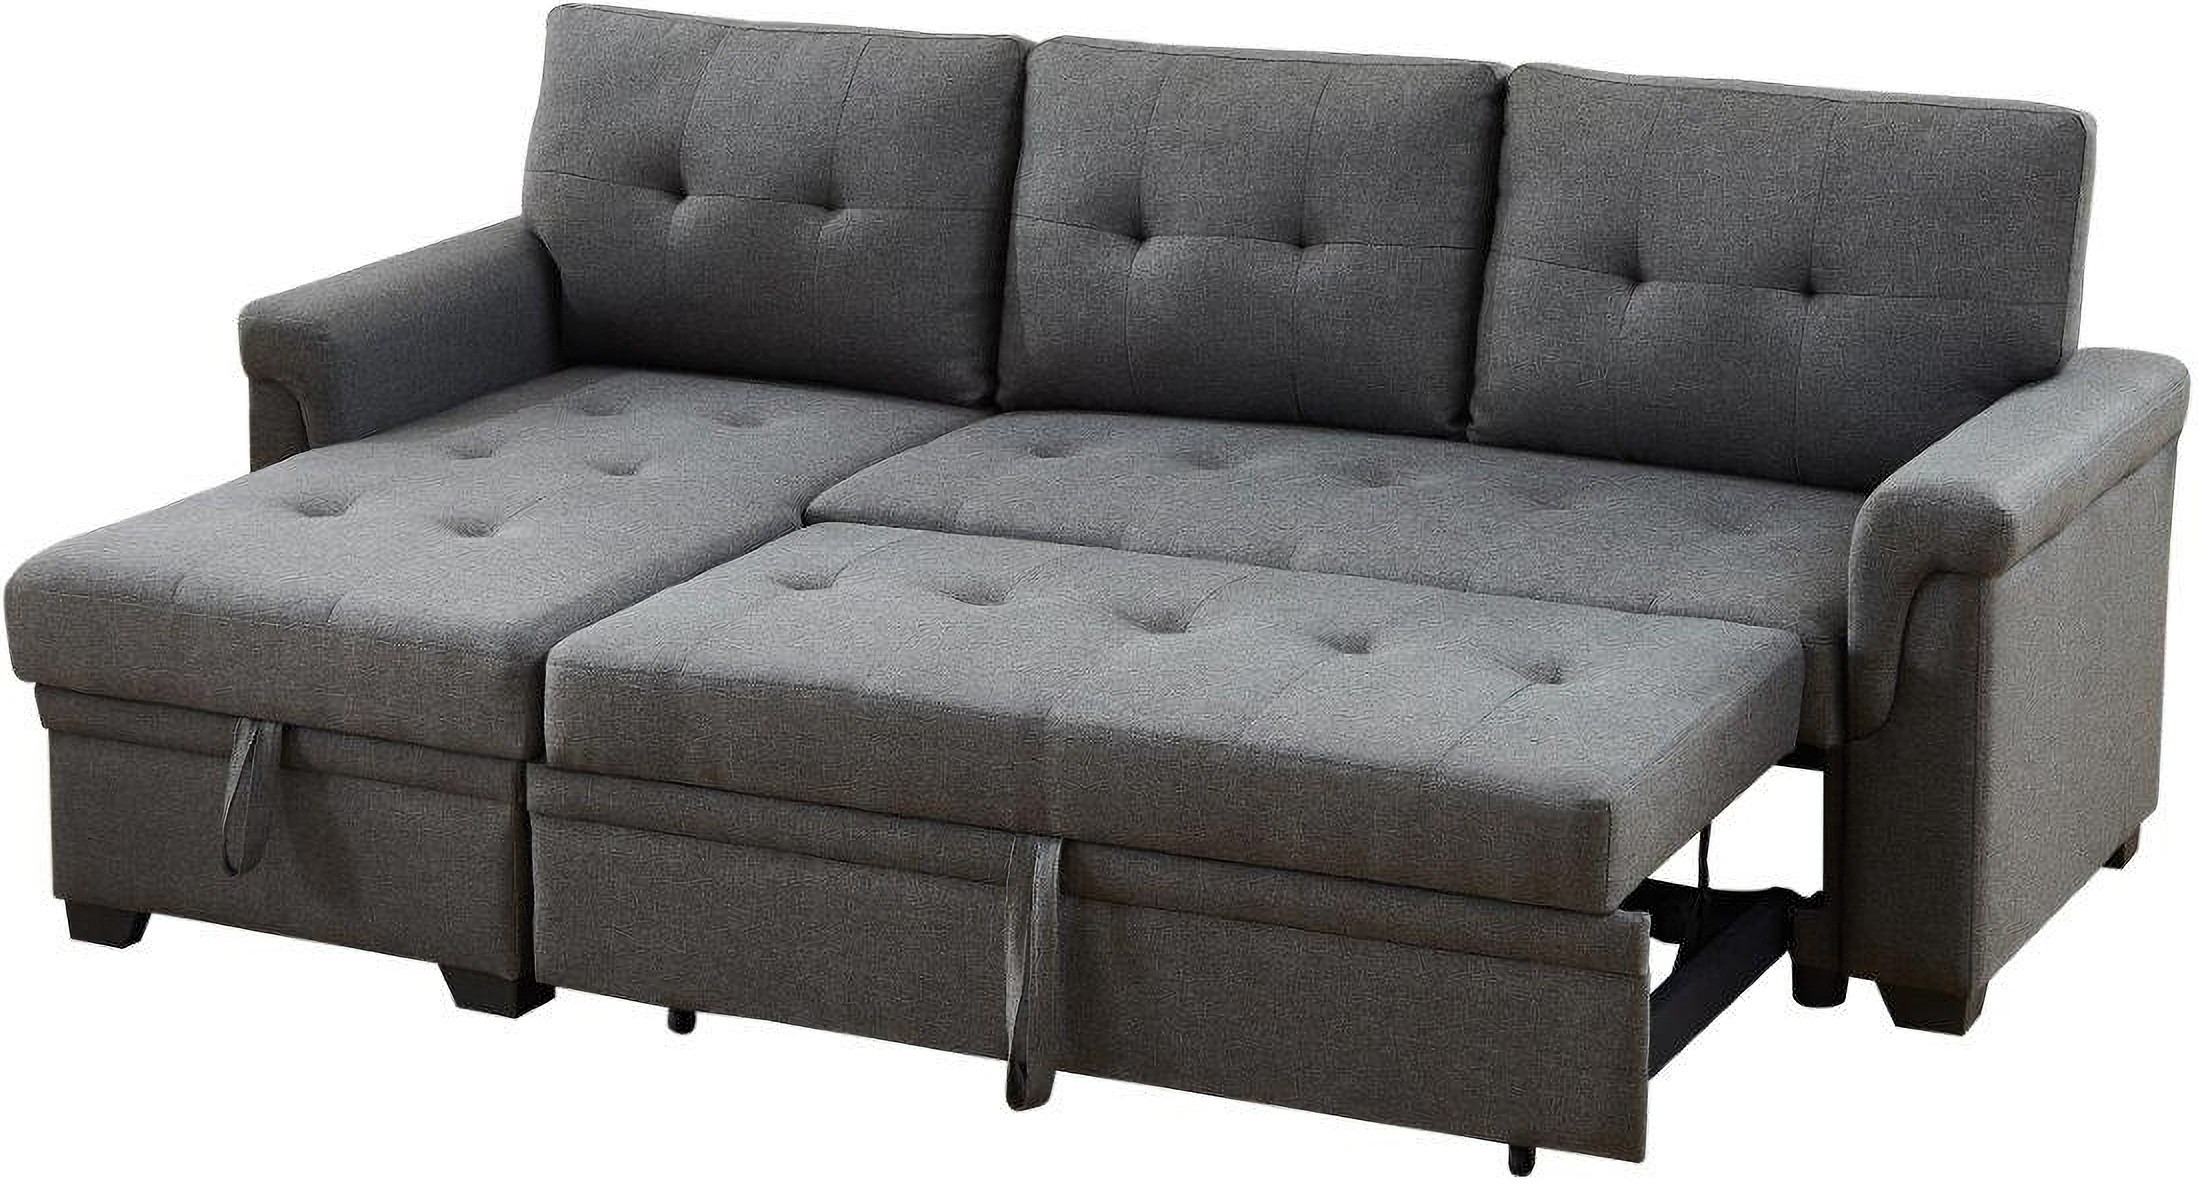 Lucca Dark Gray Linen Reversible Sleeper Sectional Sofa With Storage Chaise Qb13284978 13 